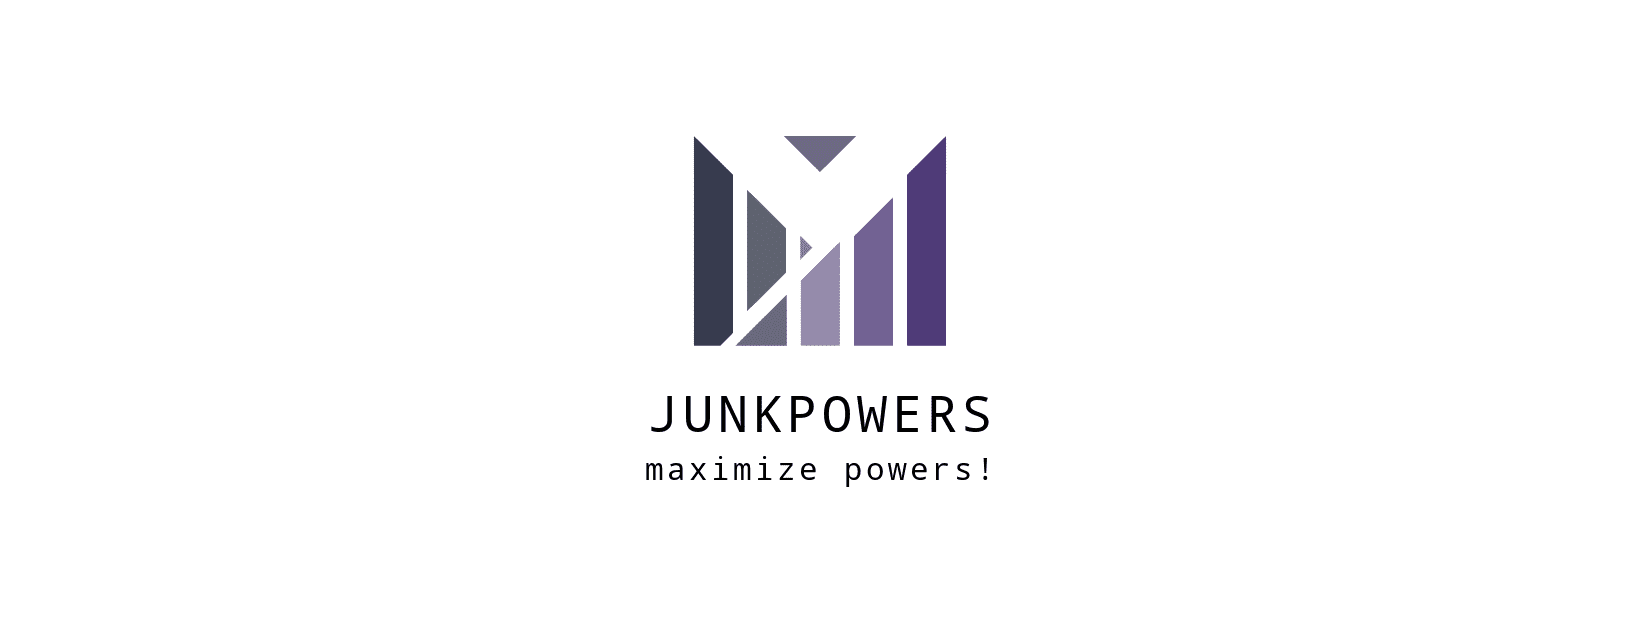 JUNKPOWERS